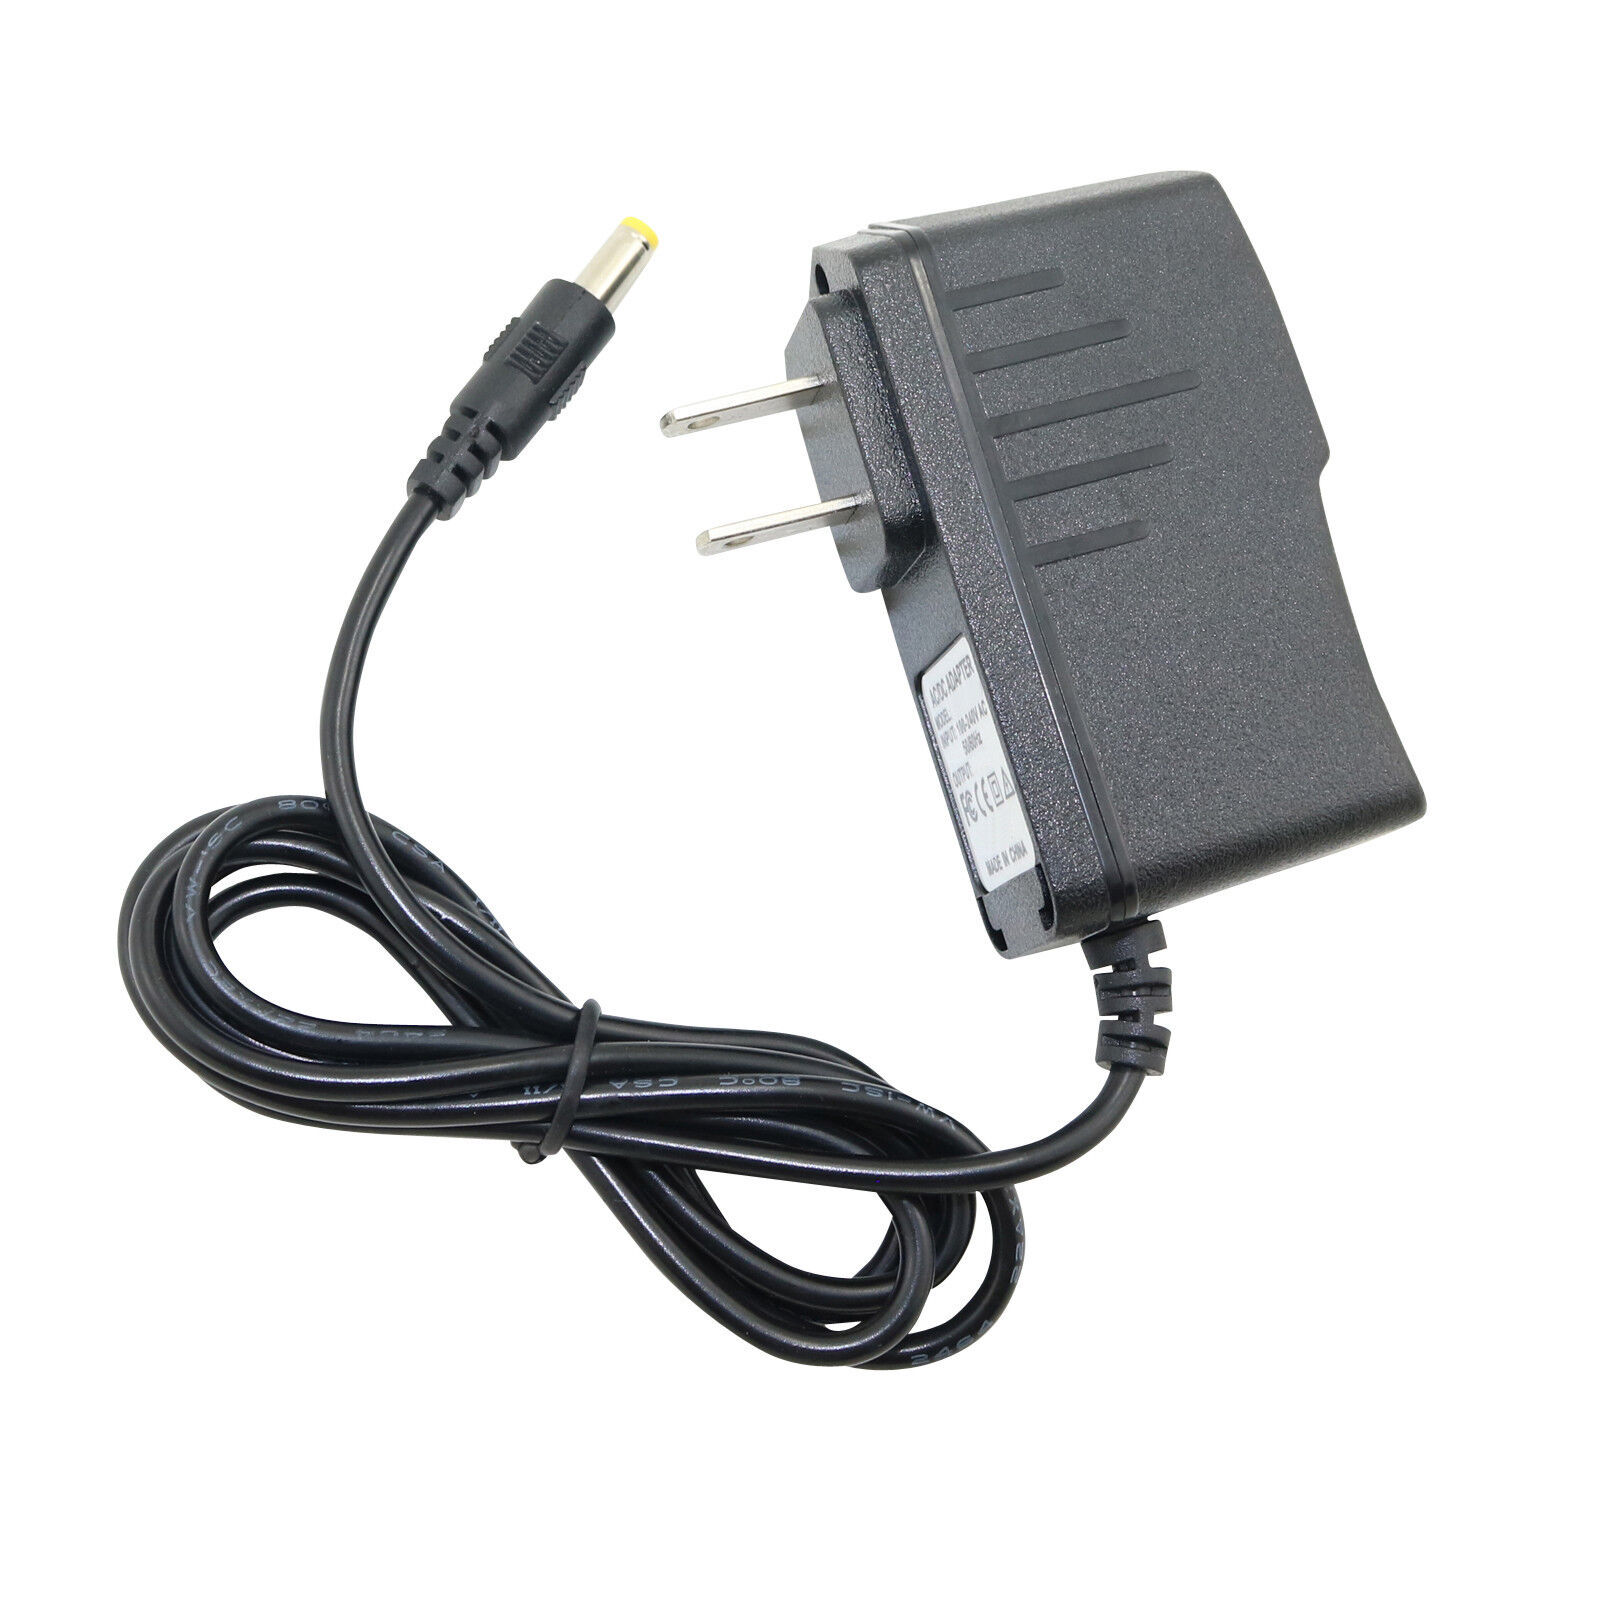 Primary image for Ac Adapter Power Supply For Motorola Surfboard Sb6141 Sb6121 Sbg6580 Cable Modem